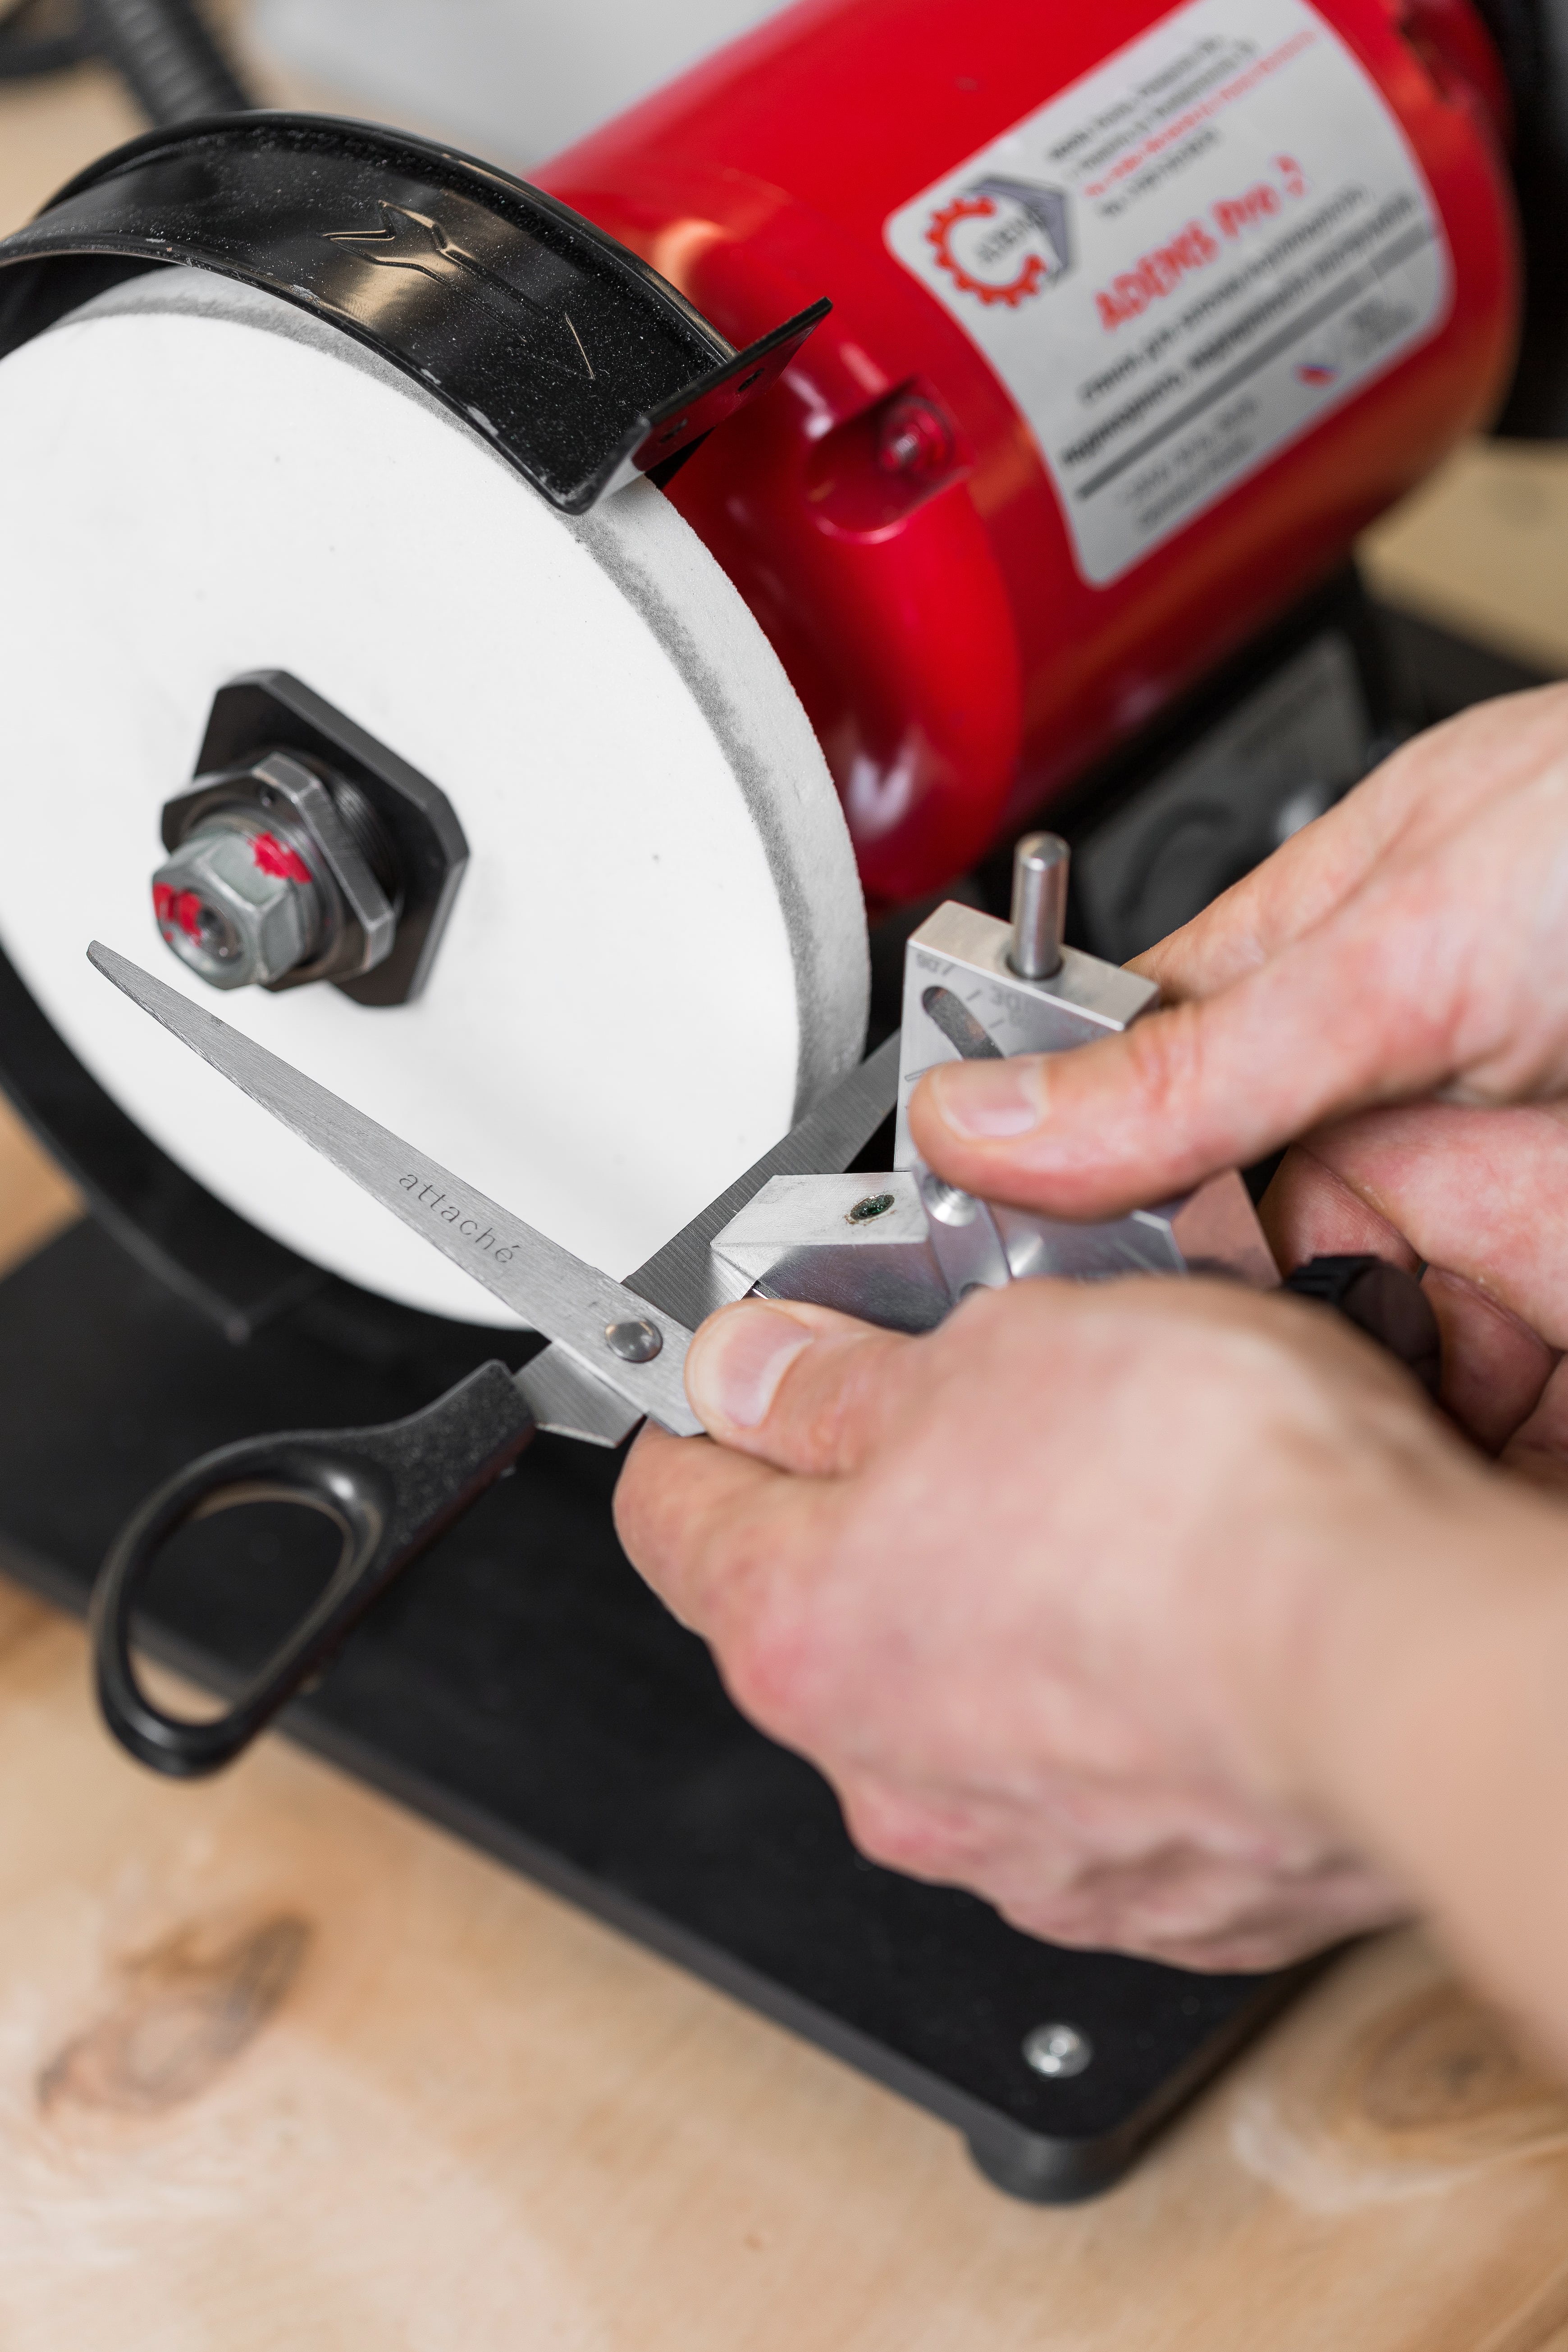 THE SHOP, INC. - Clipper Blade Sharpening Machines and Precision Lapping  Discs